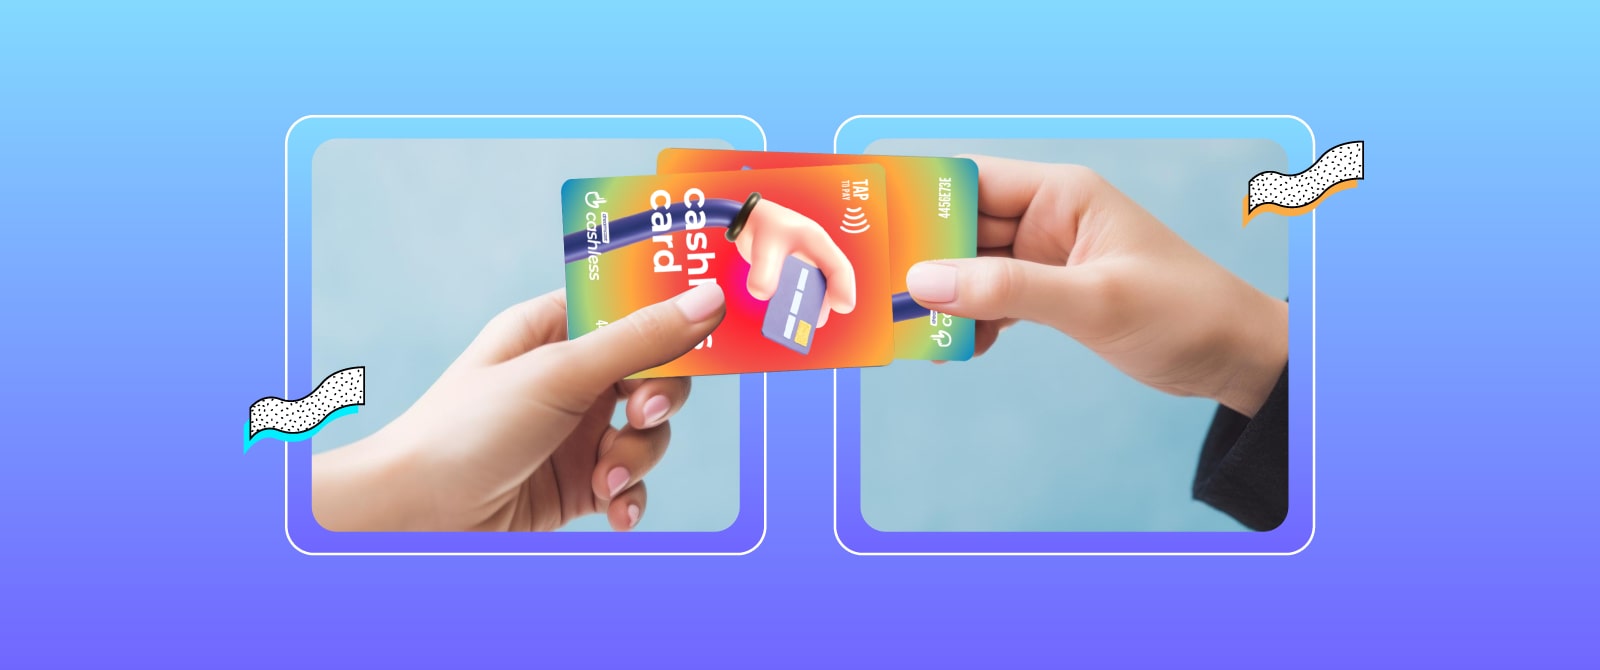 Reasons to Use RFID Based Prepaid Cards for Cashless Canteen Management System